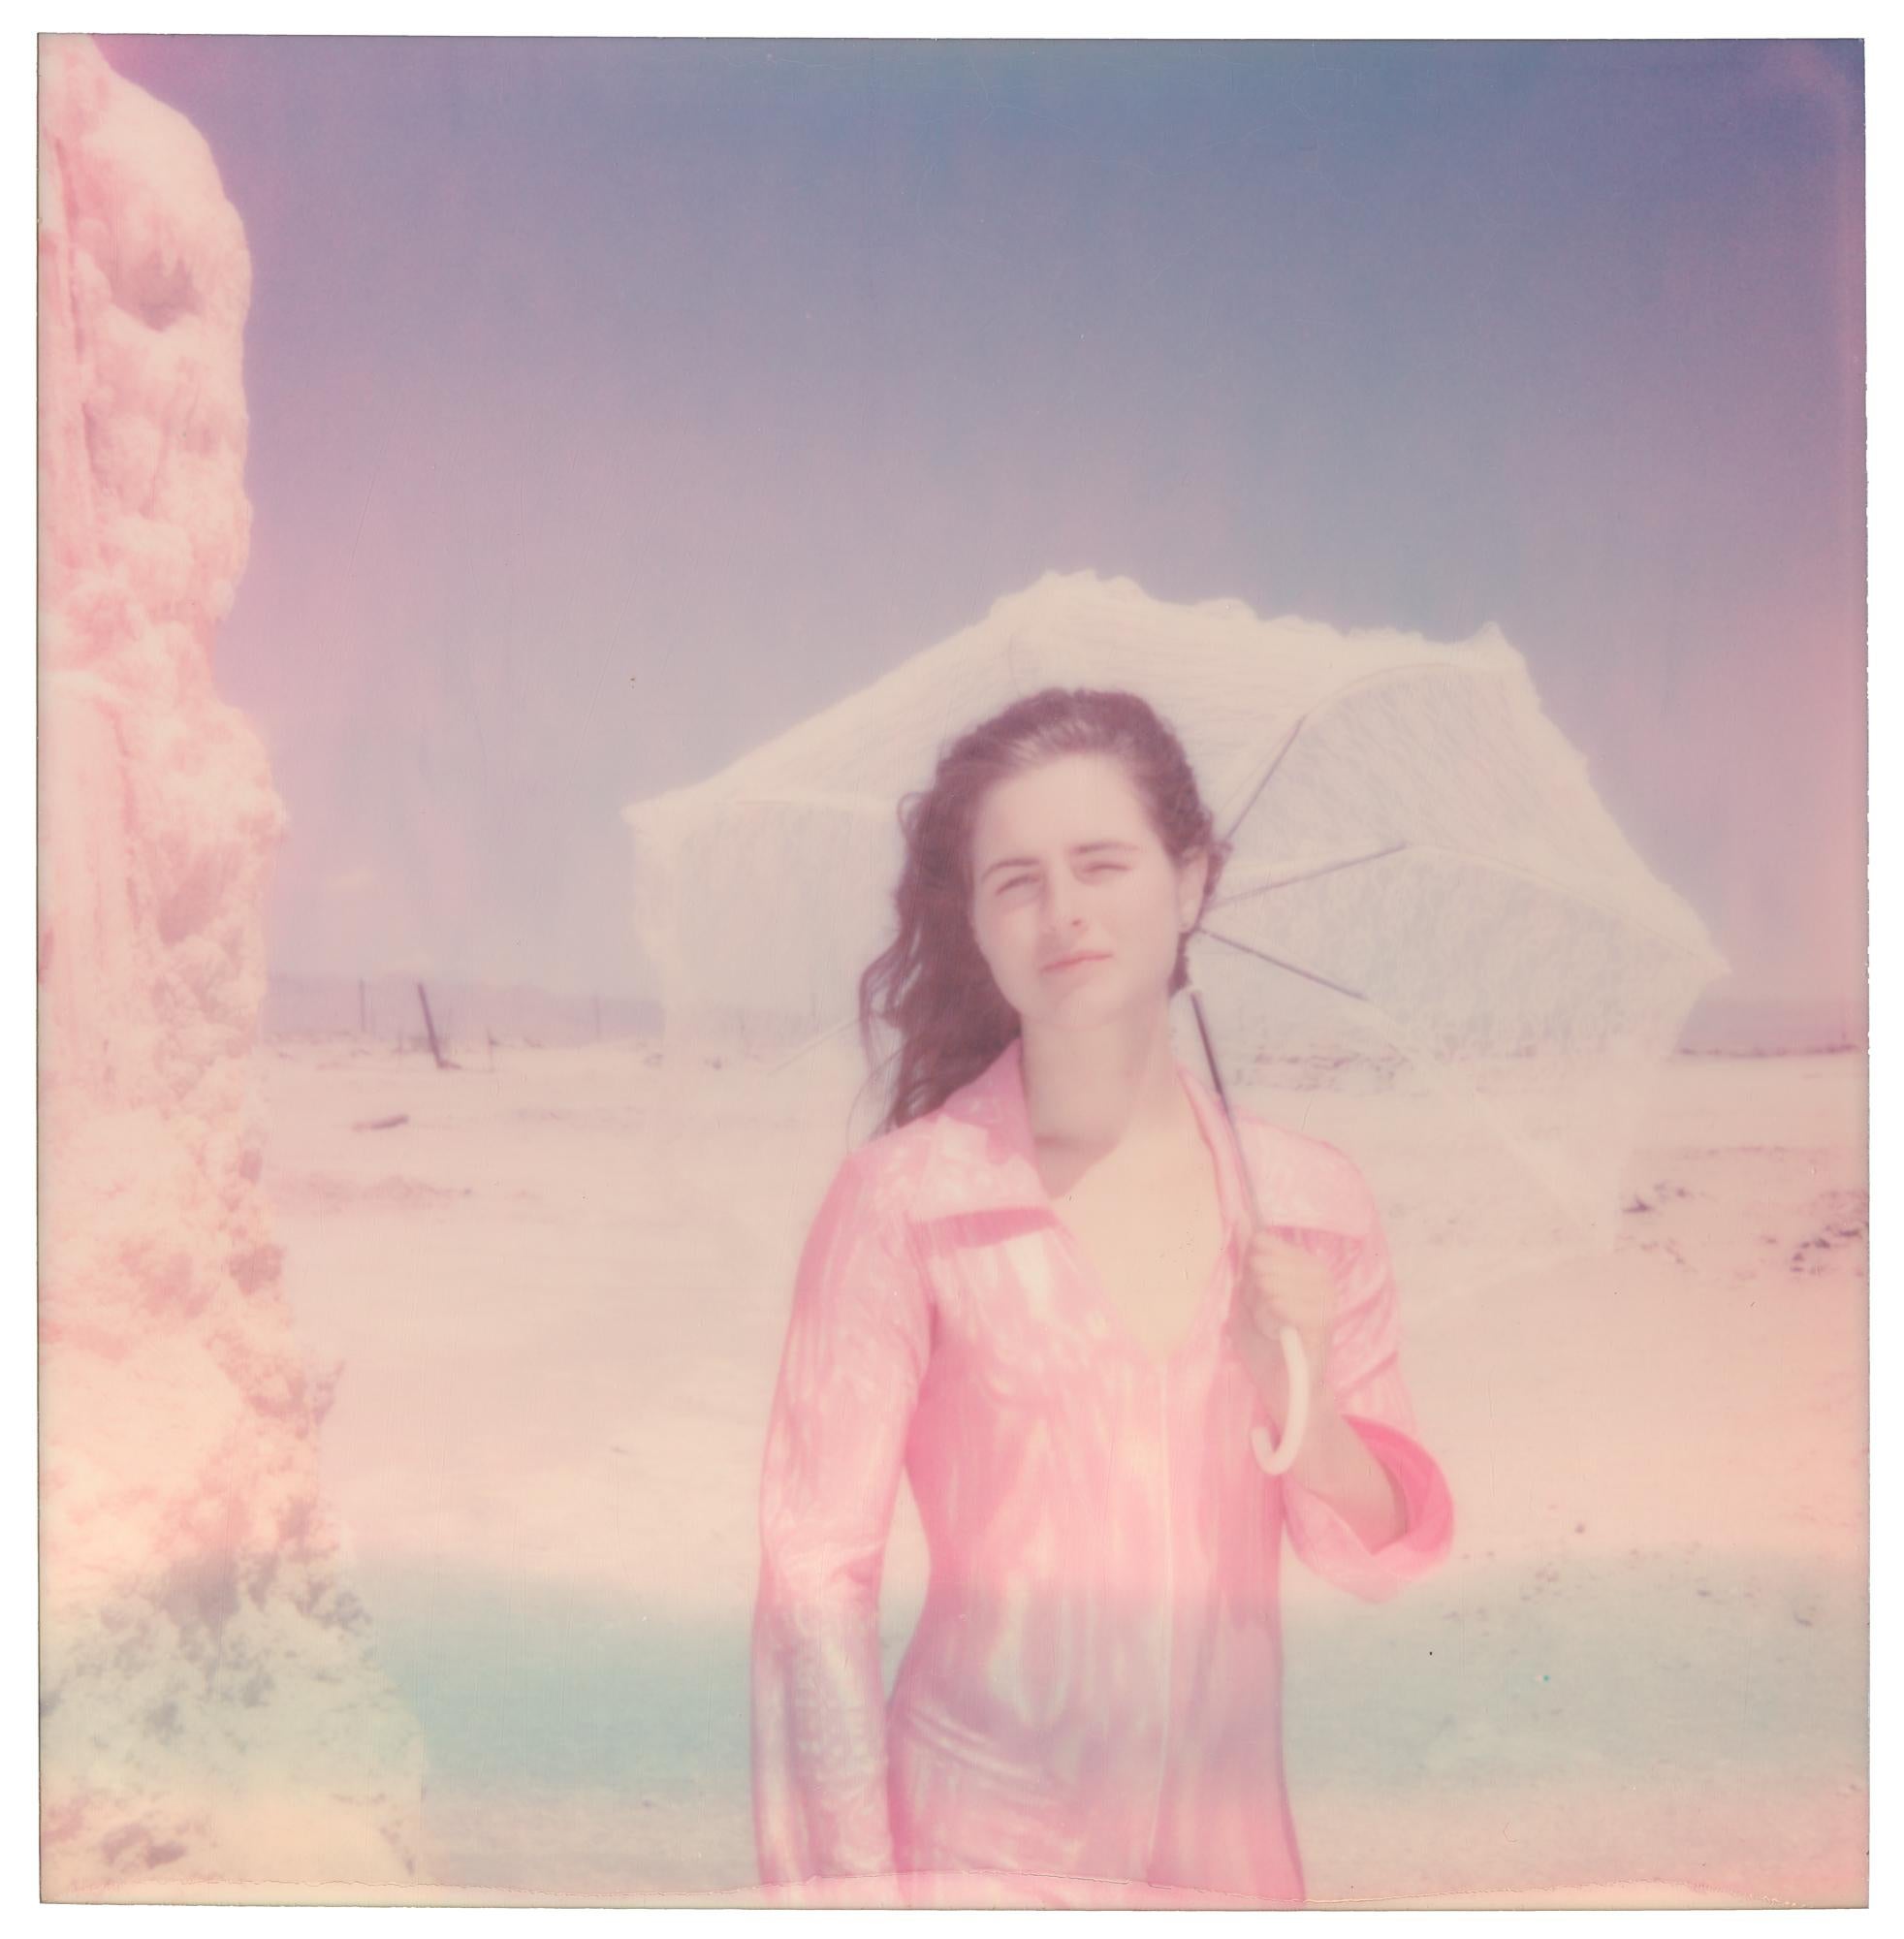 Pretty in Pink (Ensign Broderick record Shoot 'Blood Crush') - Bombay Beach, CA